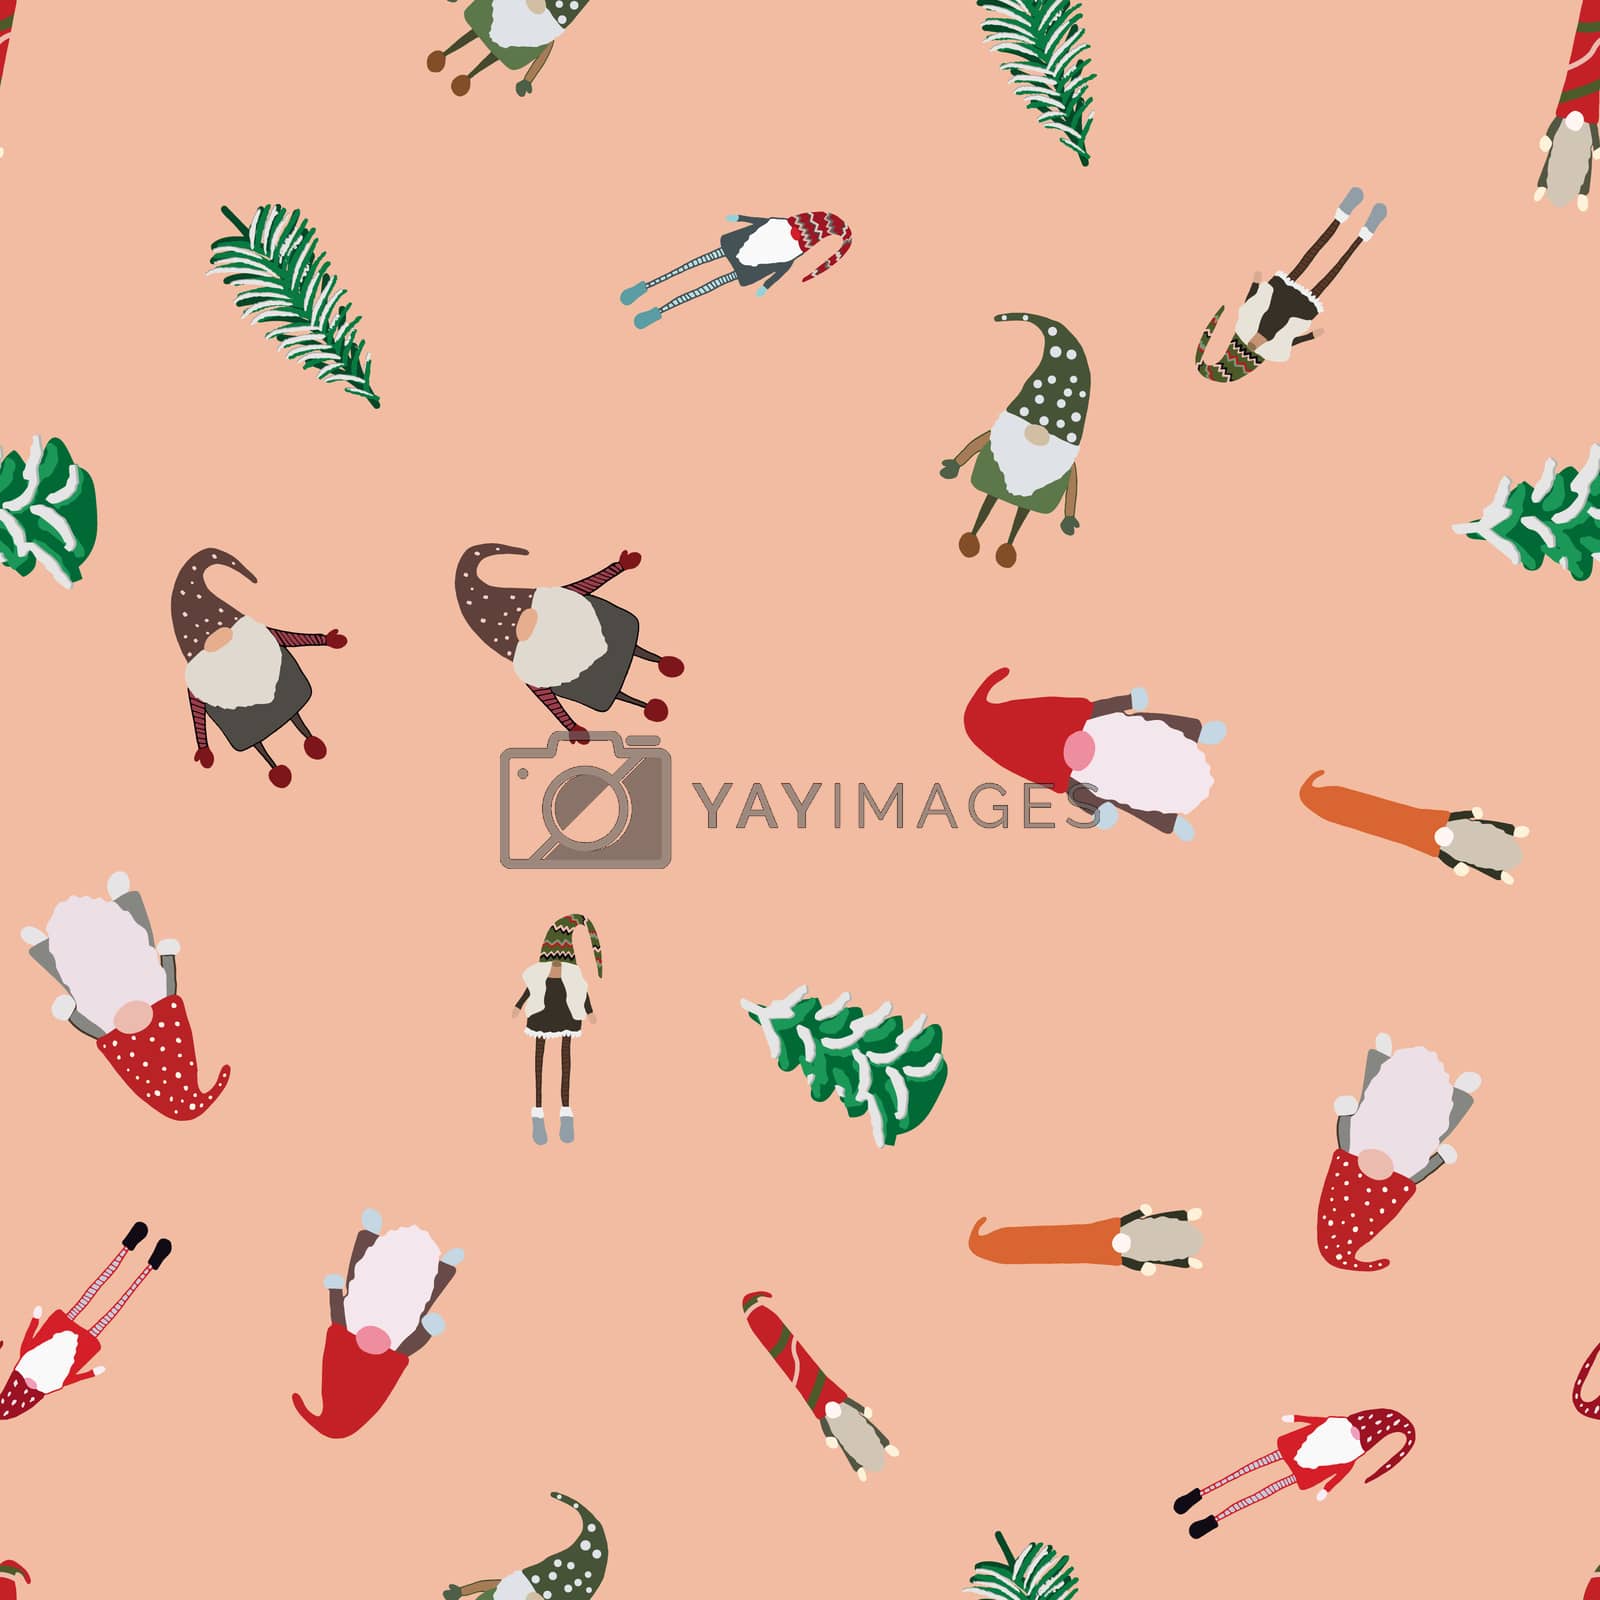 Royalty free image of Seamless pattern with scandinavian gnomes and Christmas trees. by Nata_Prando